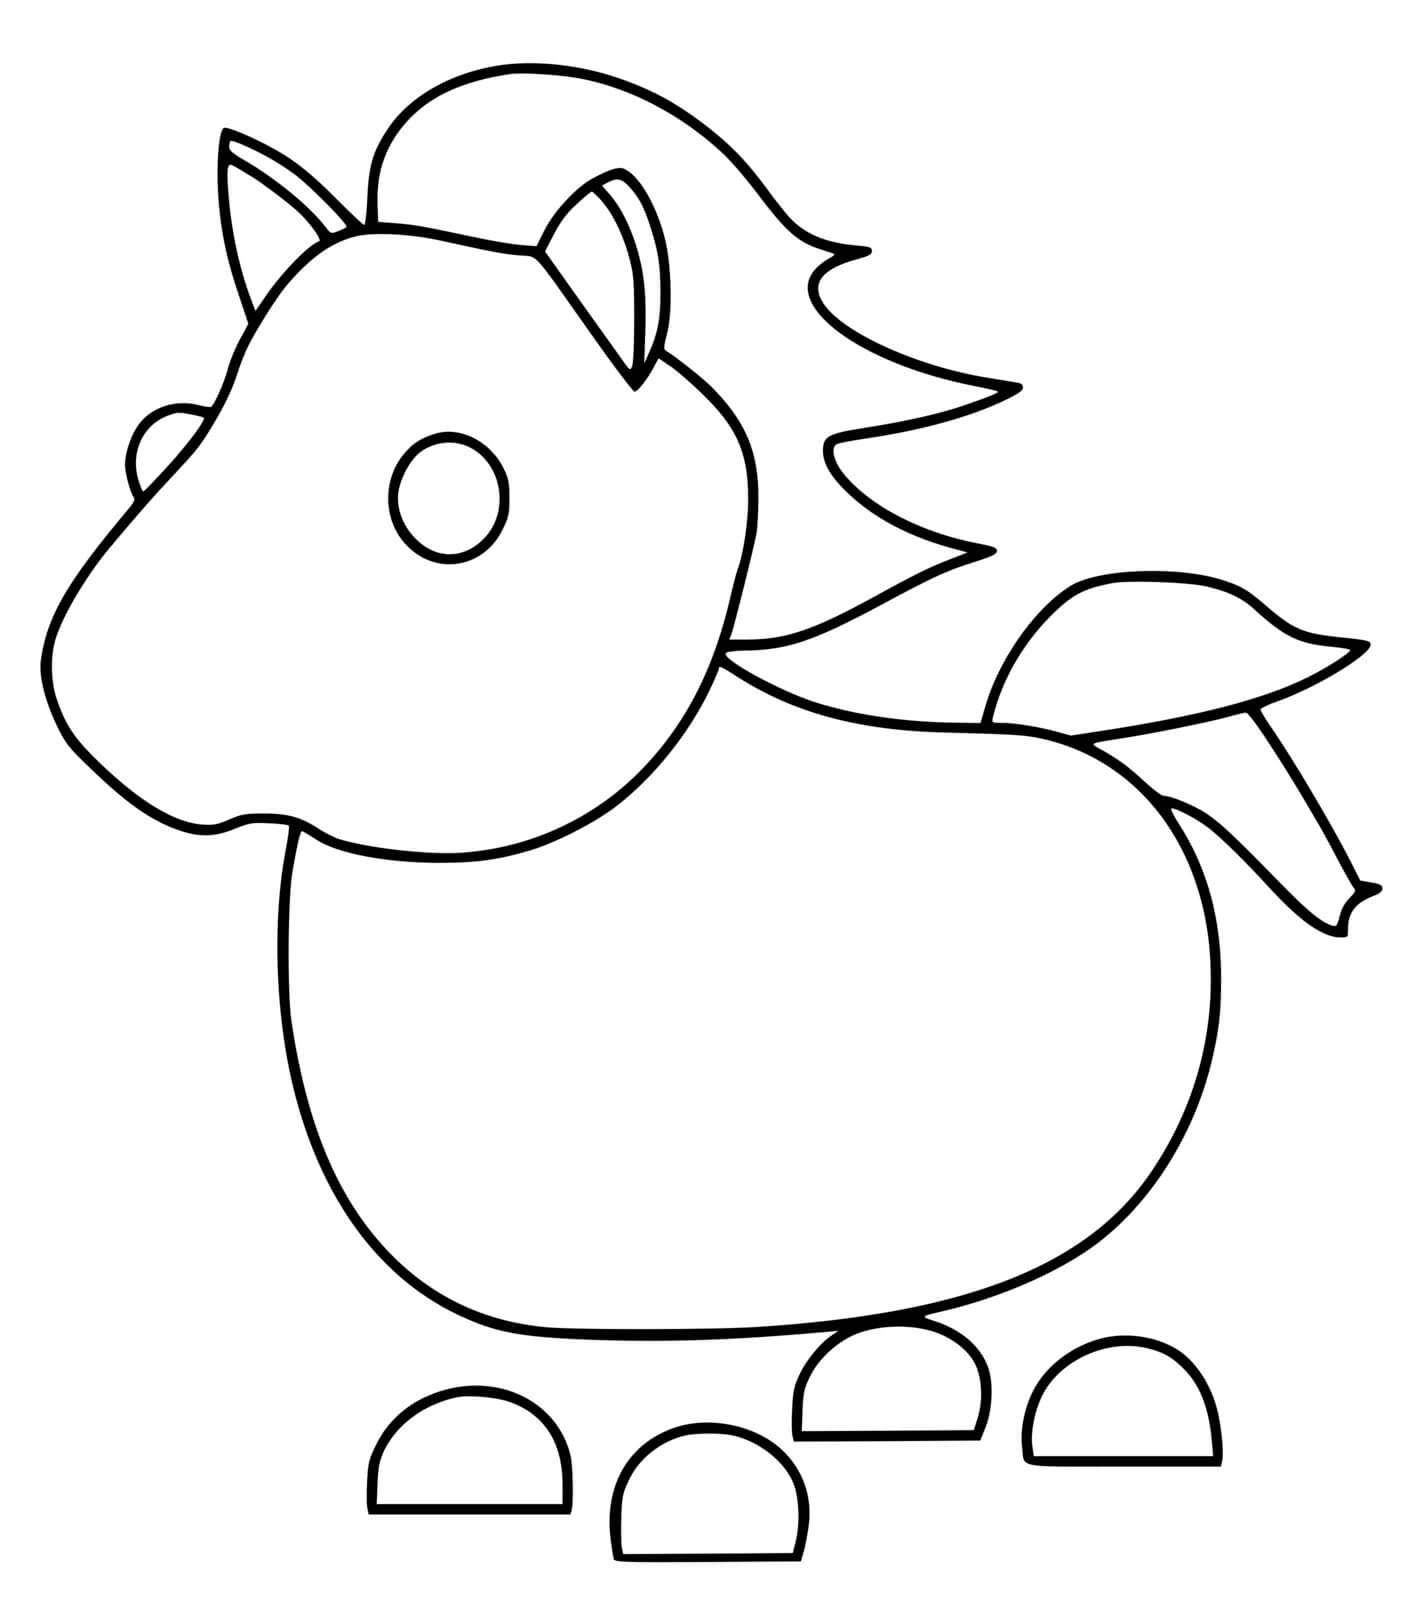 Adopt Me Coloring Pages   Coloring Cool